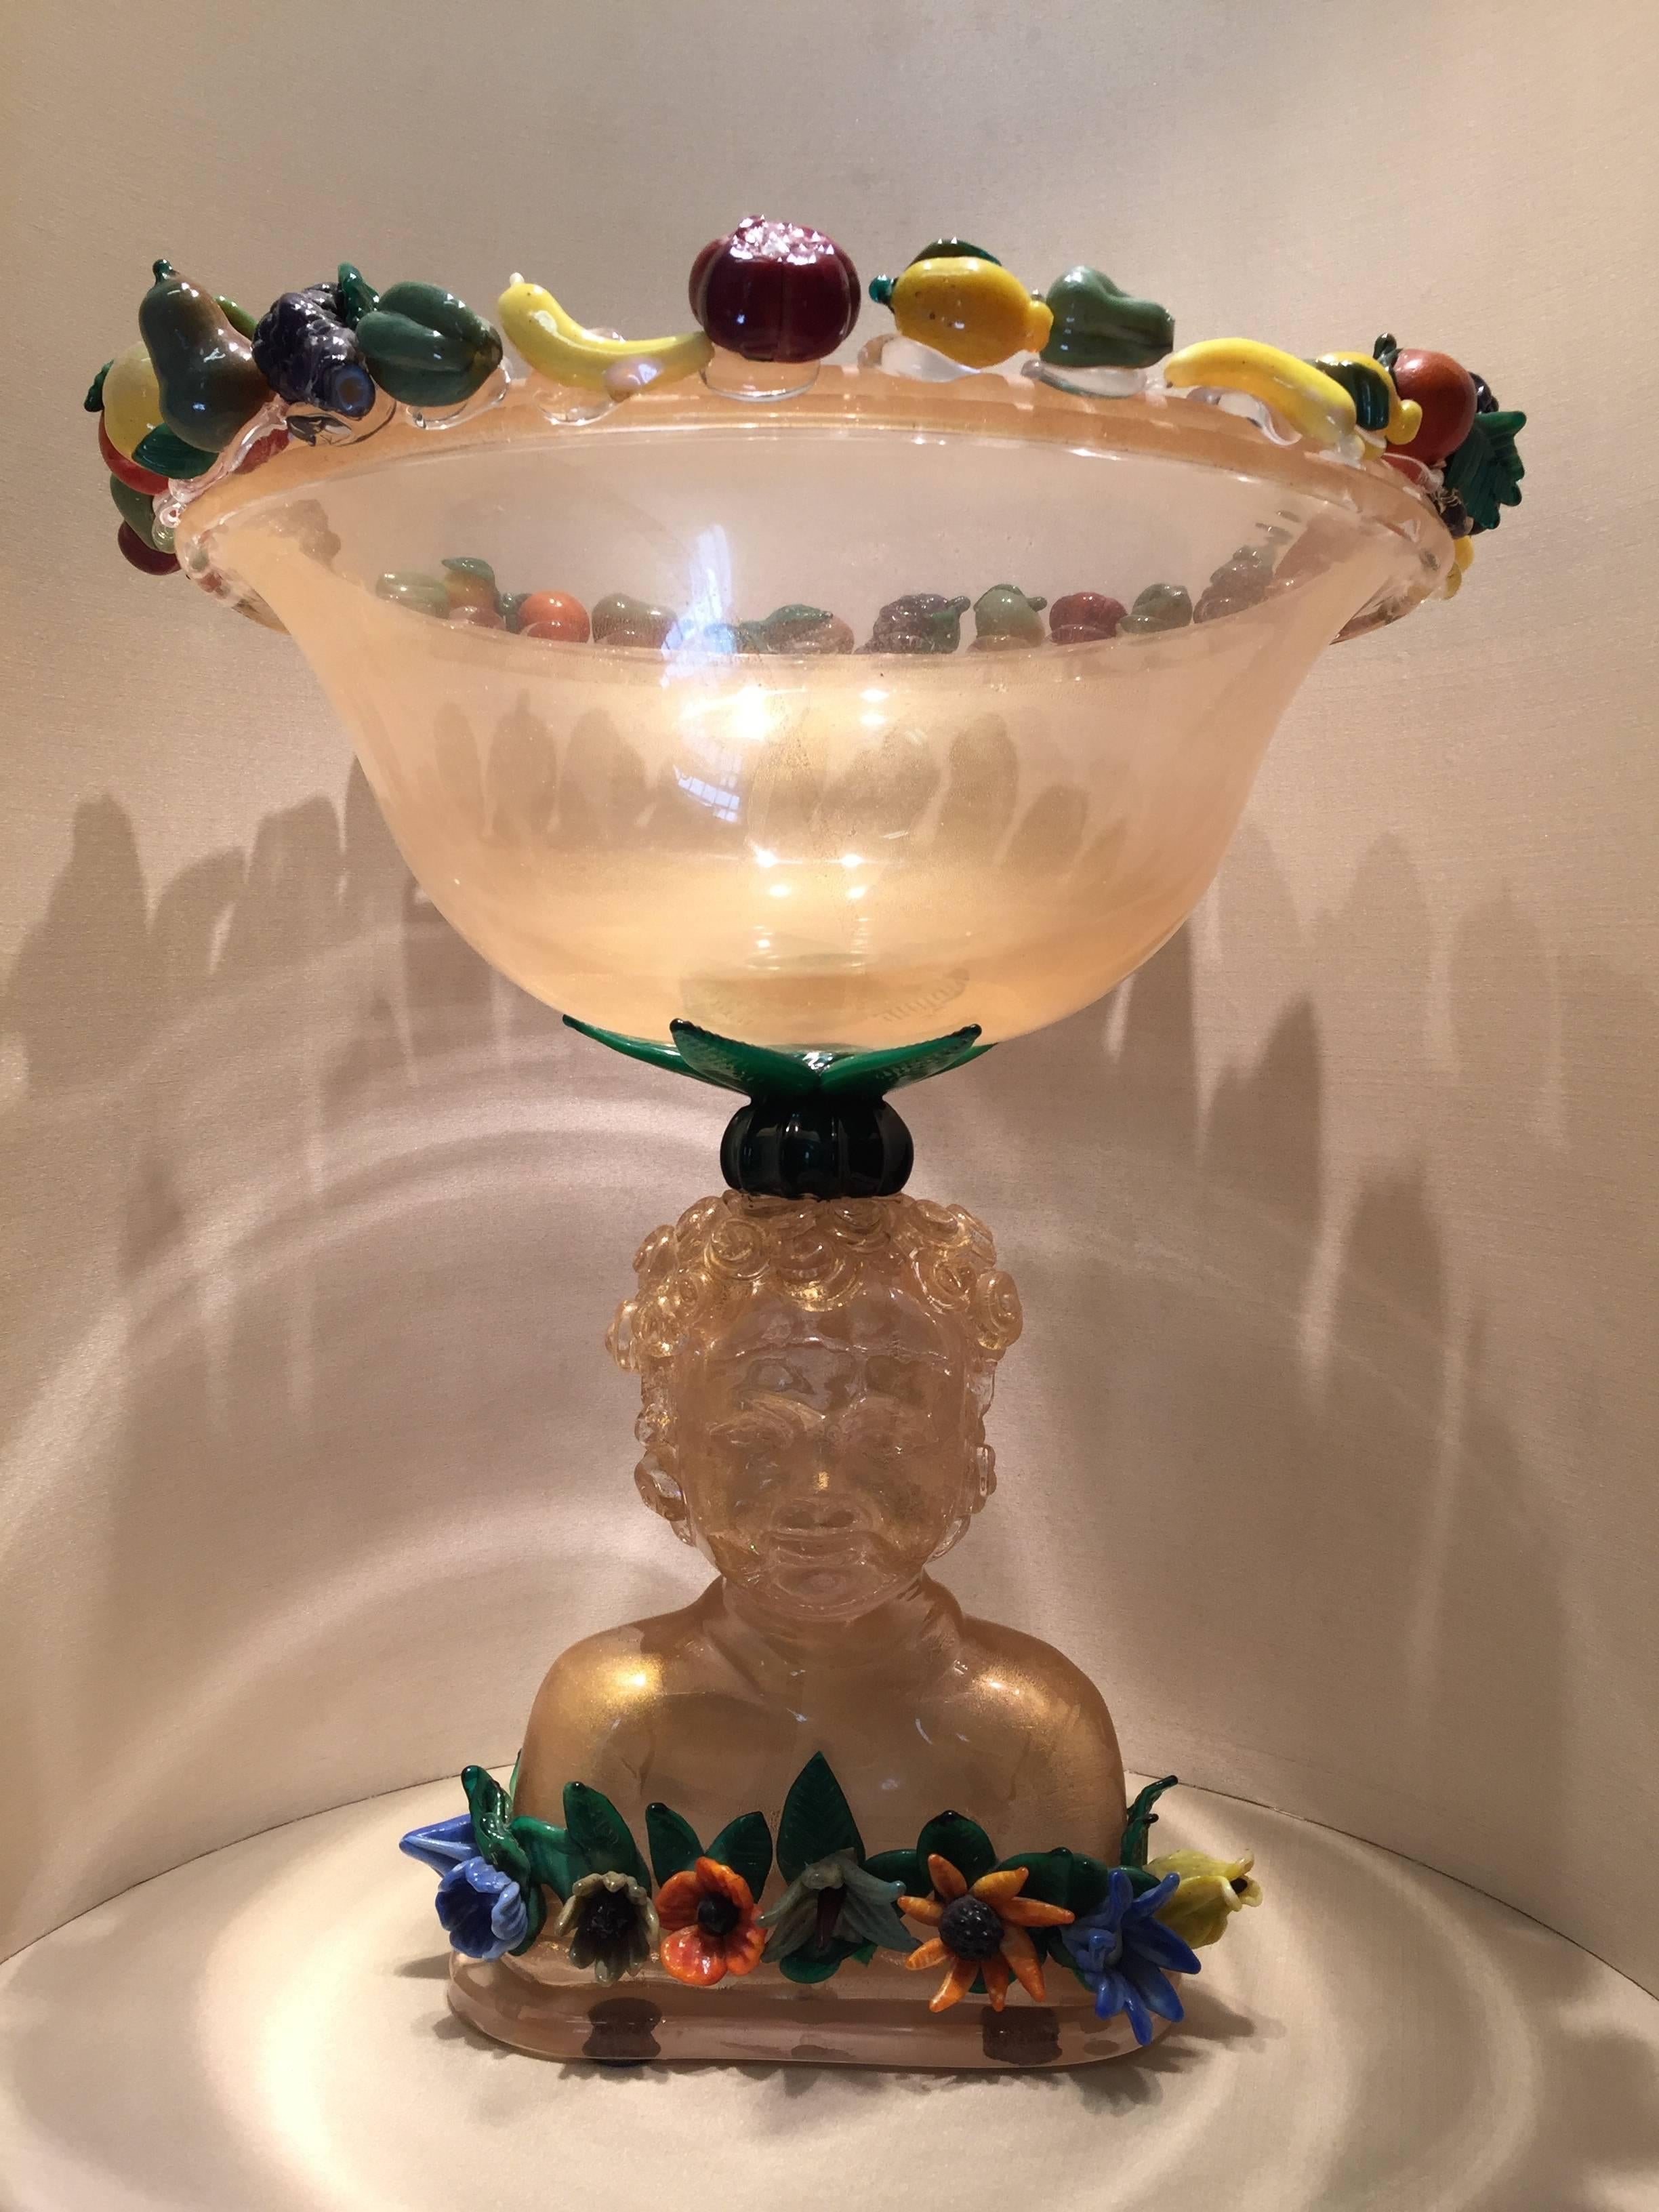 An amazing and one of a kind Murano glass with 24-karat gold leaf sculpture with putto, glass jacketed fruits and flowers on the base and on top of the bowl. This beautiful sculpture is made by the great glass maker Pino Signoretto in 1995.

Pino